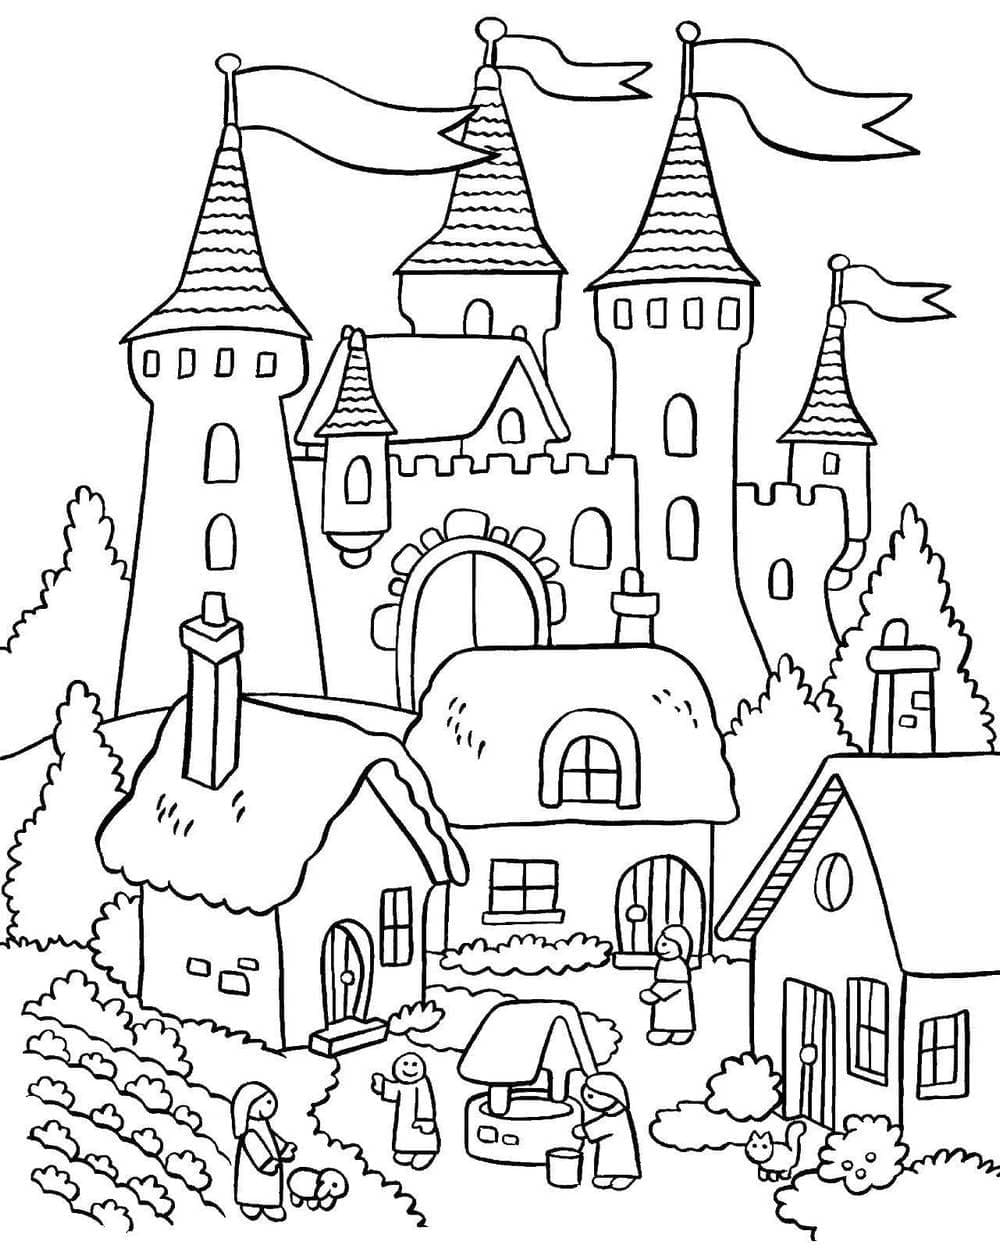 Castle and village coloring page